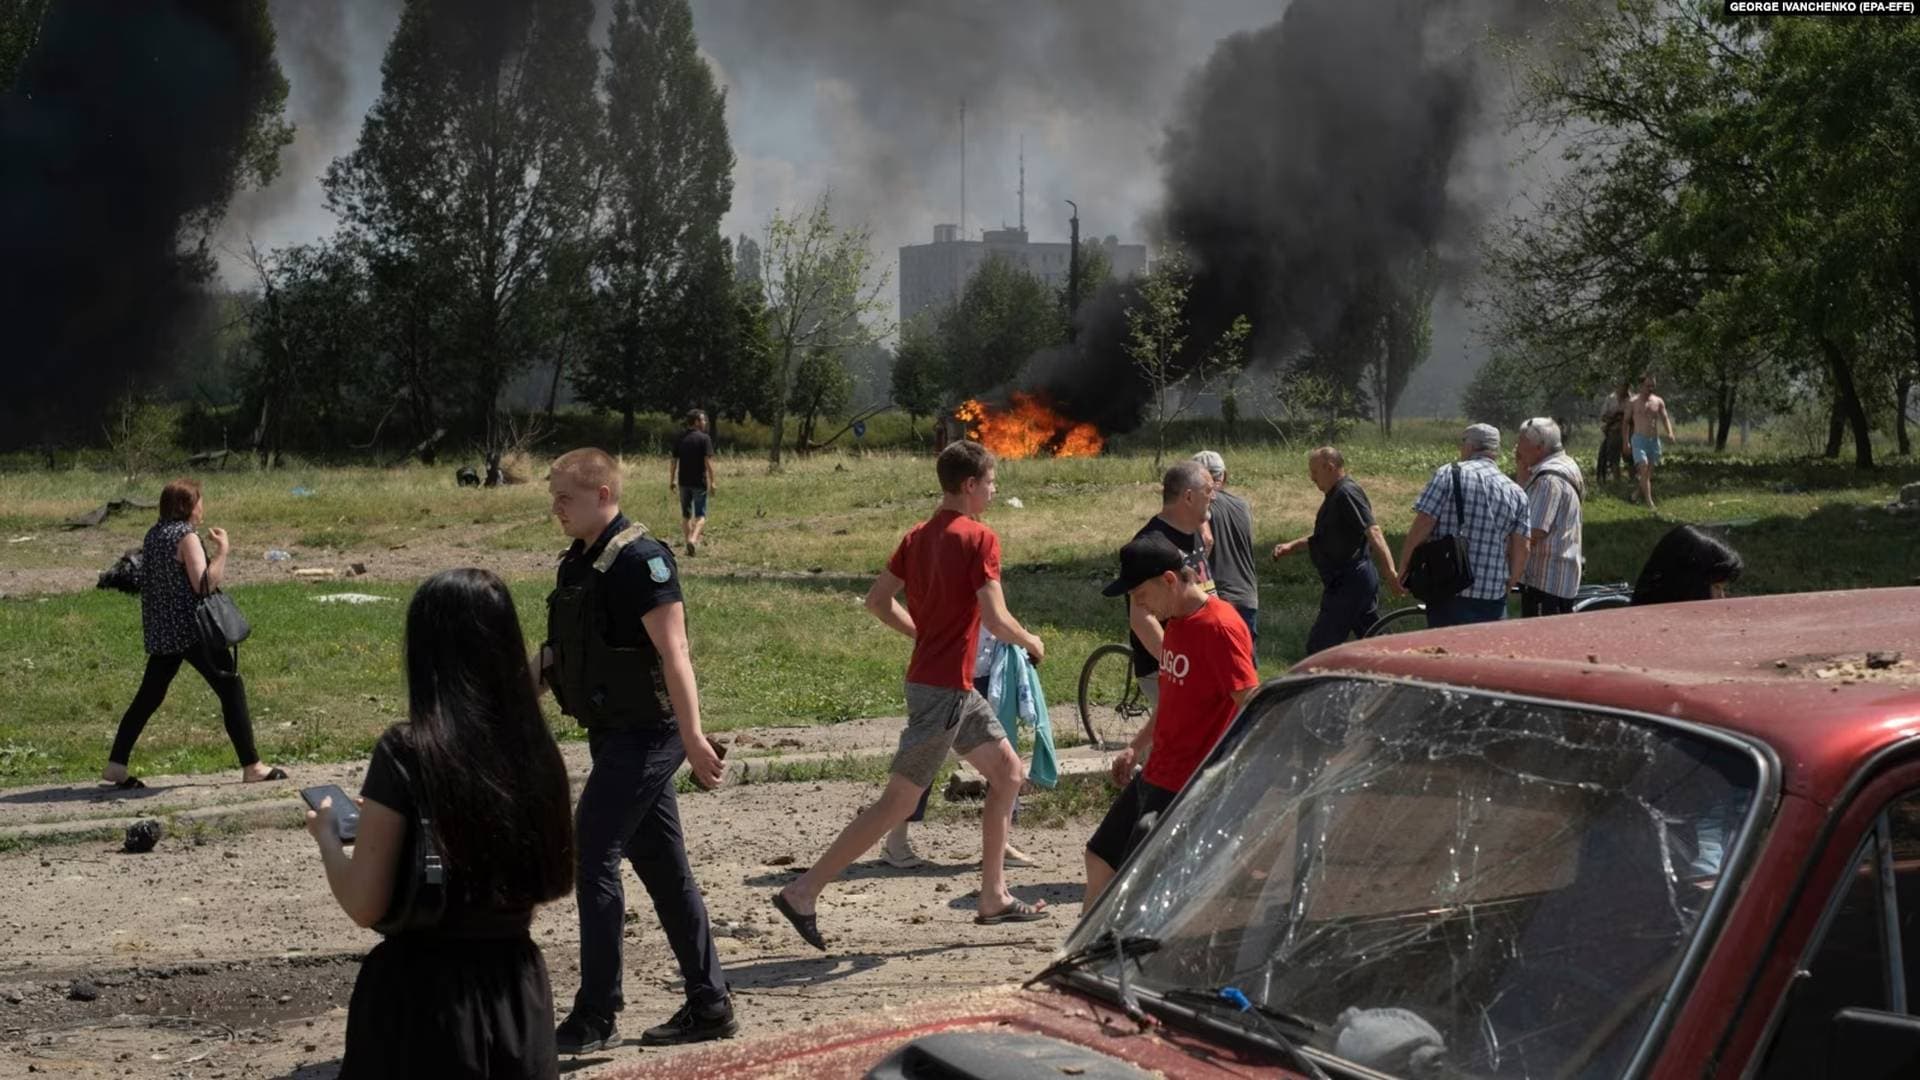 Locals react at the scene as cars burn nearby